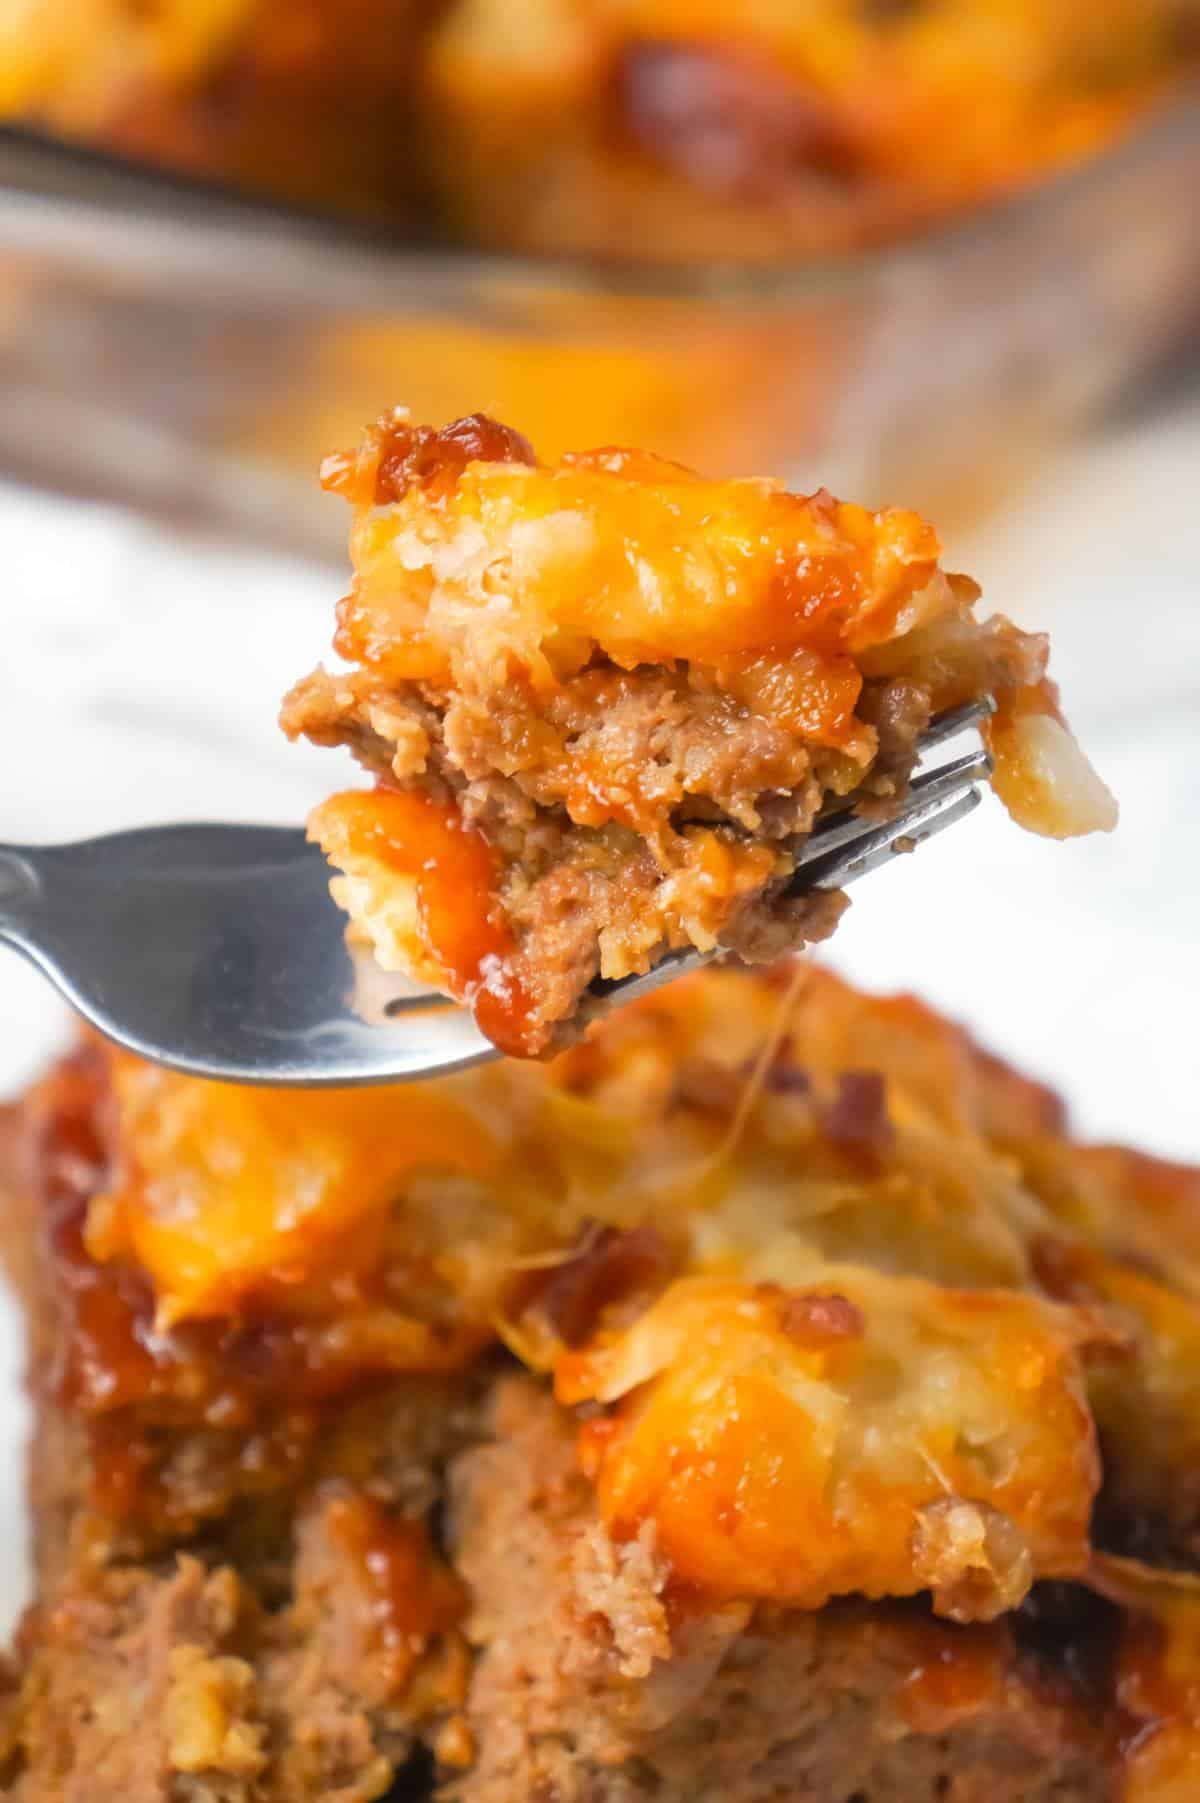 Cheesy Tater Tot Meatloaf Casserole is an easy ground beef dinner recipe with a meatloaf base, topped with a ketchup and bbq sauce glaze, tater tots, shredded cheese and crumbled bacon.